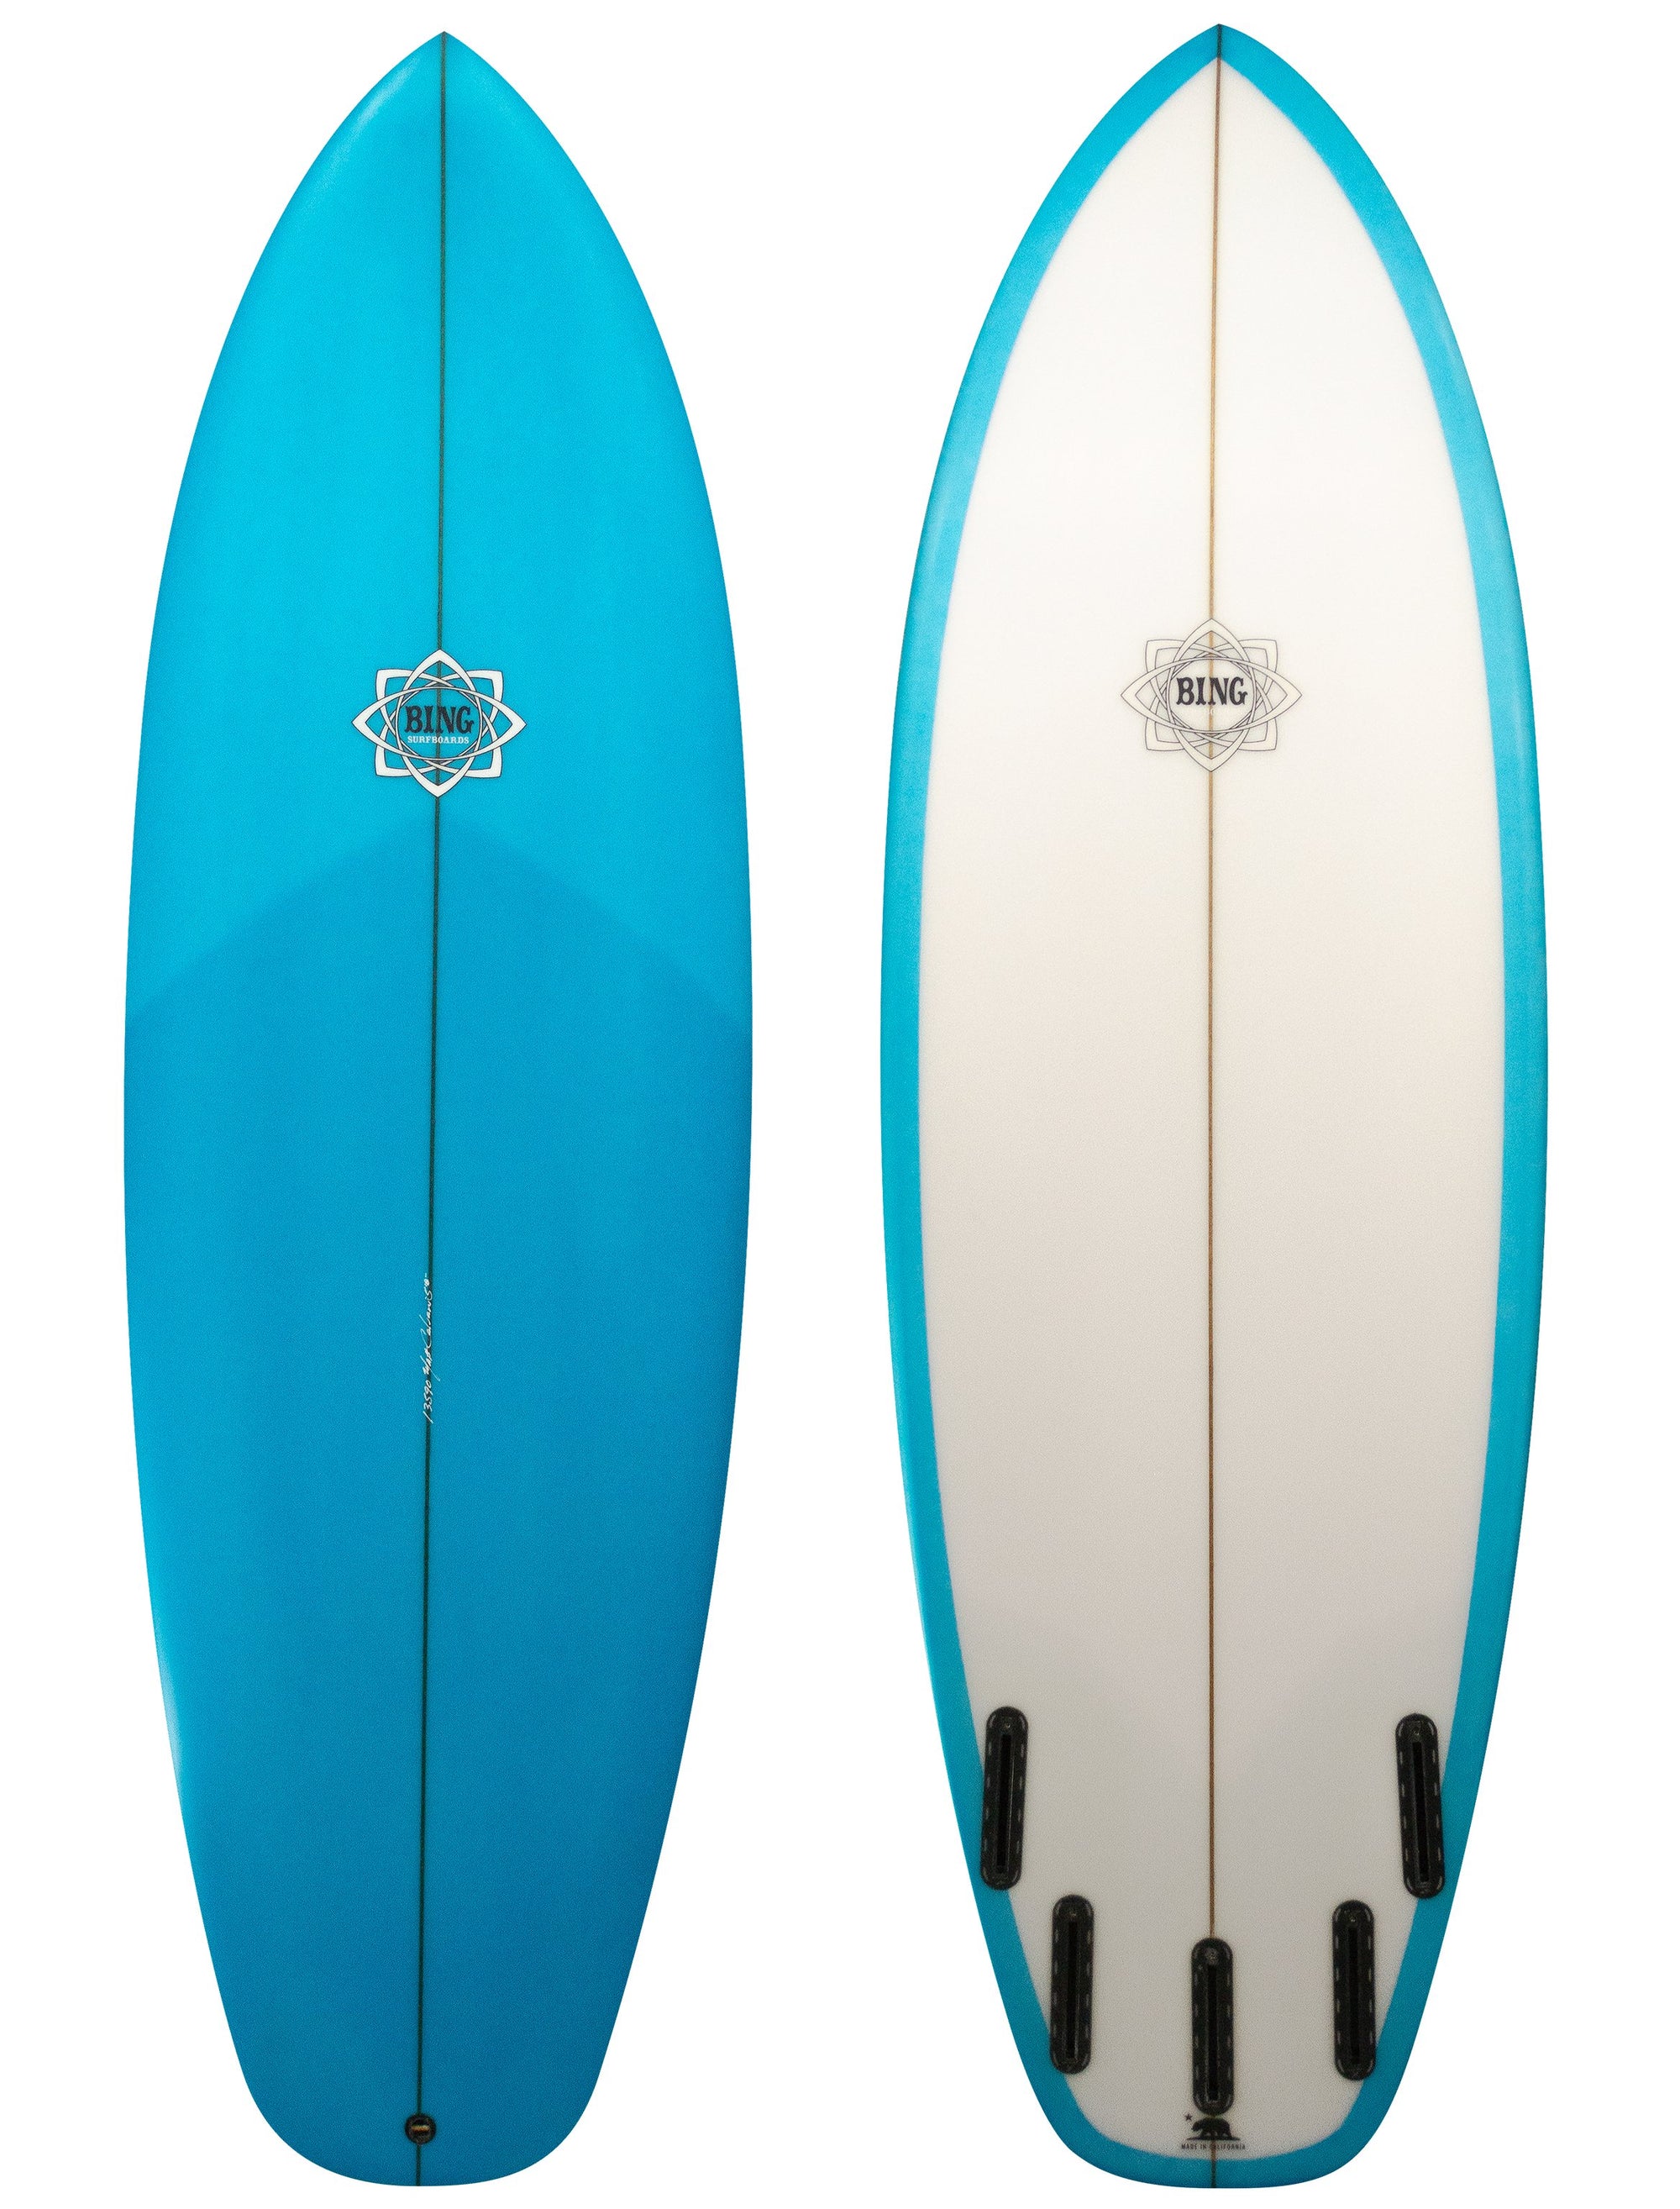 Collections - Bing Surfboards